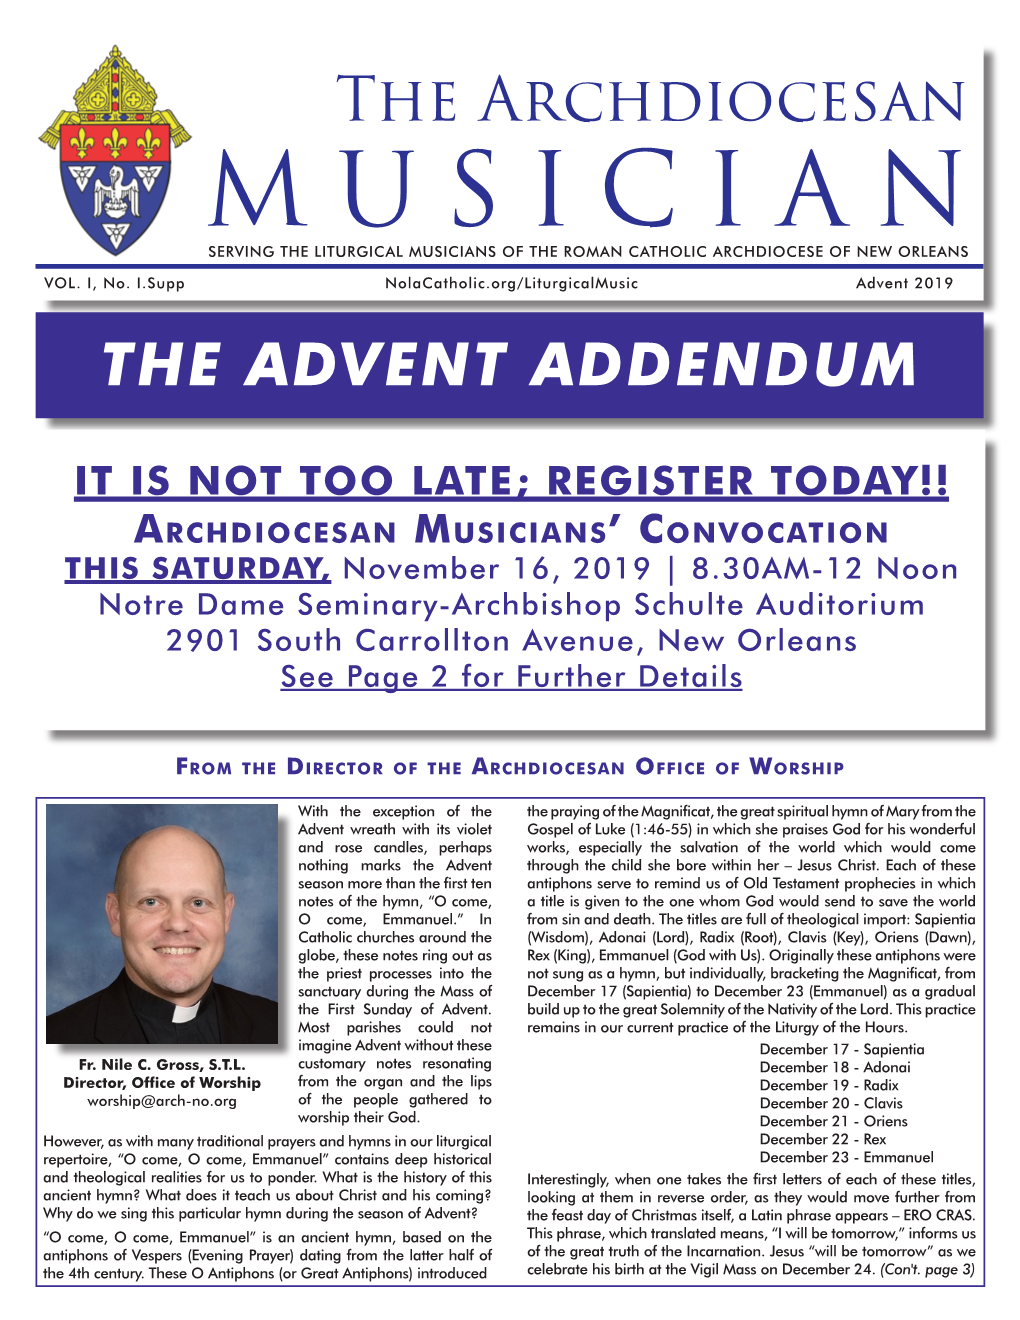 Musicianserving the Liturgical Musicians of the Roman Catholic Archdiocese of New Orleans Vol